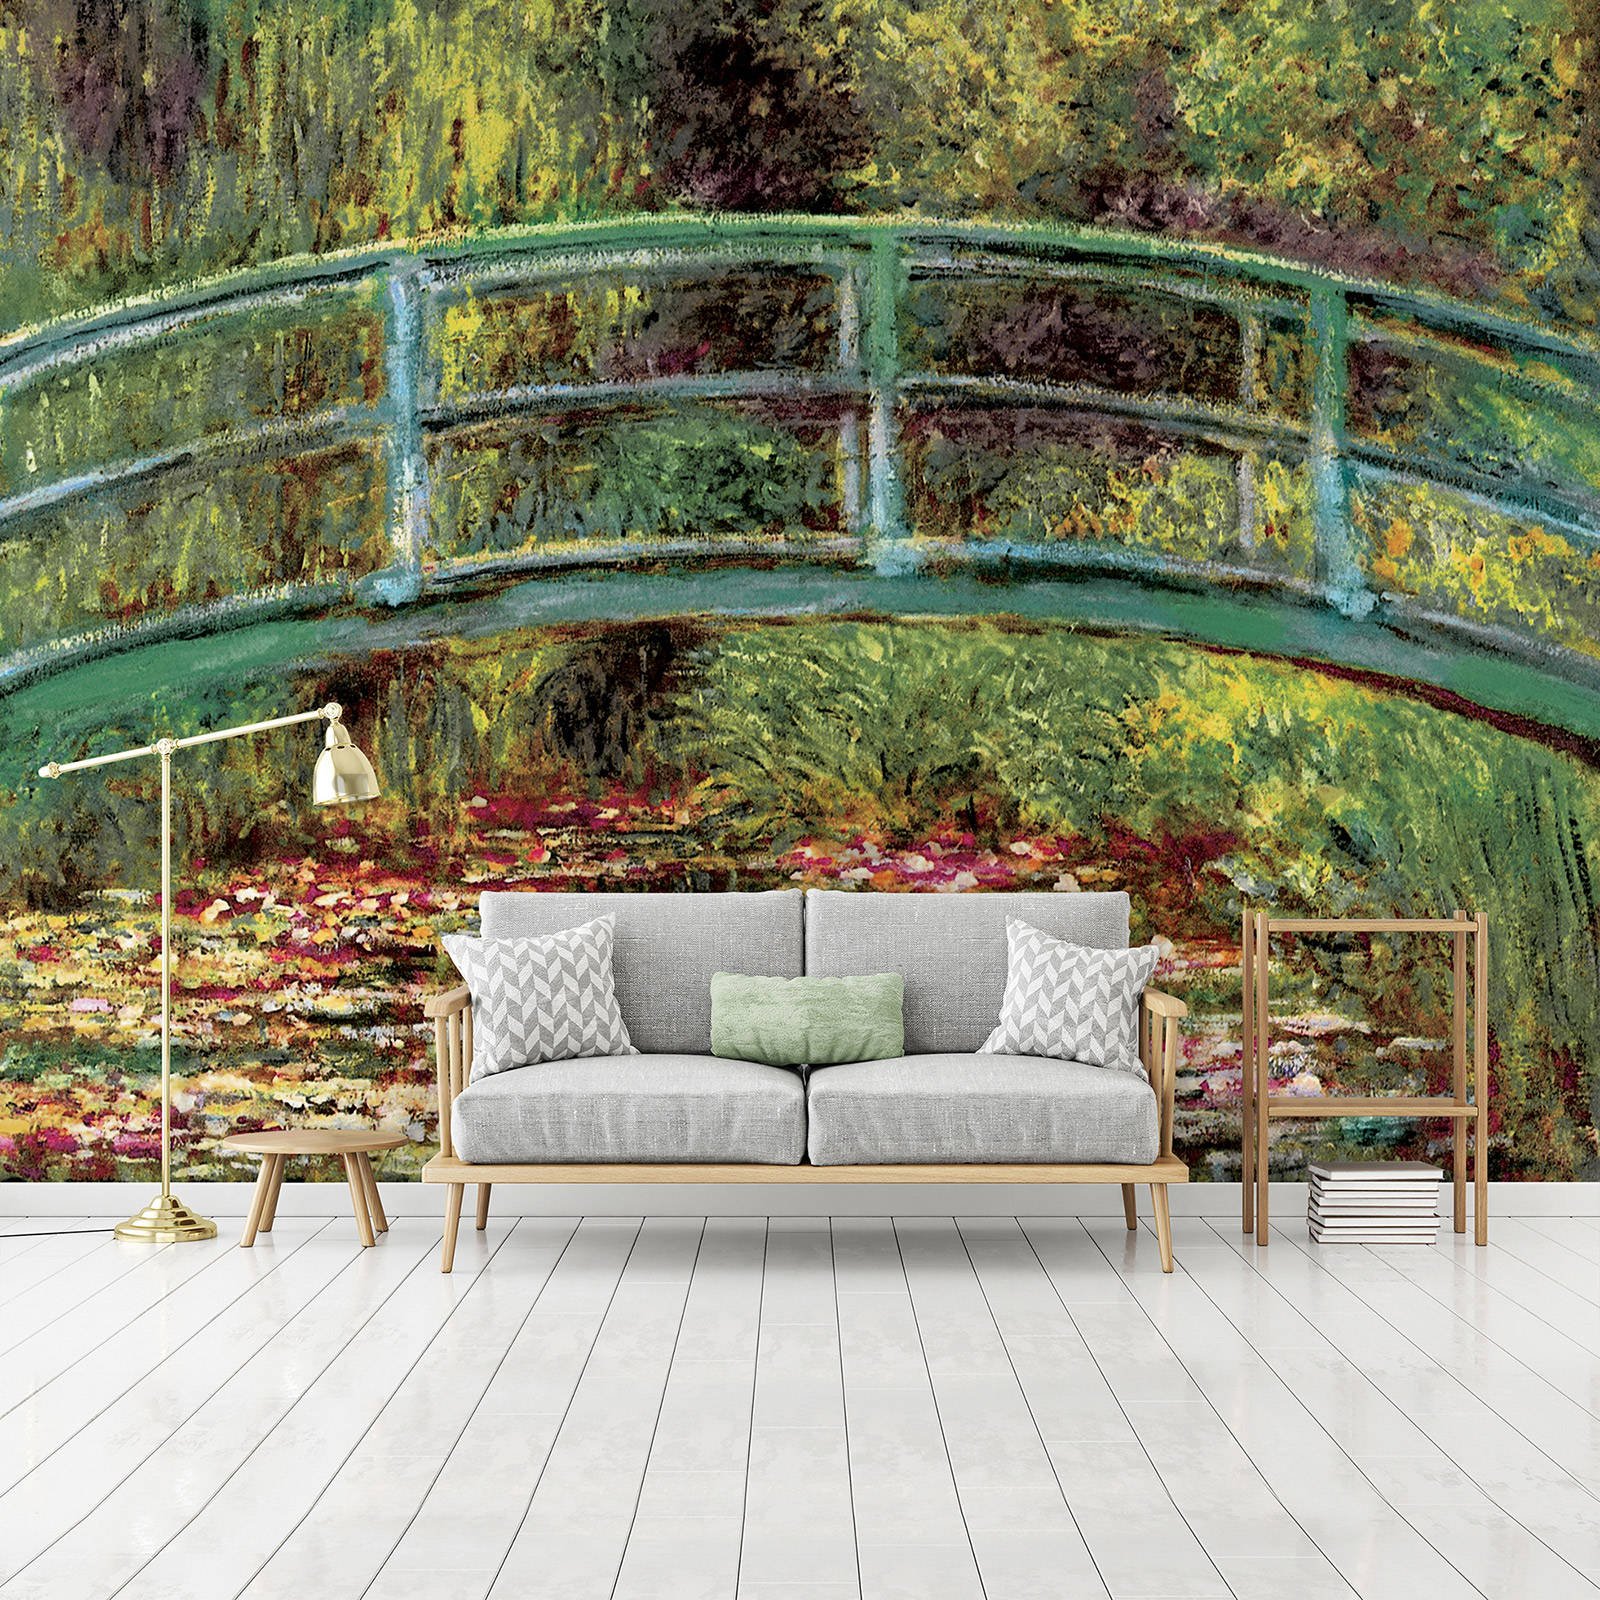 Wall mural vlies: Claude Monet, Pond with water lilies - 104x70,5 cm